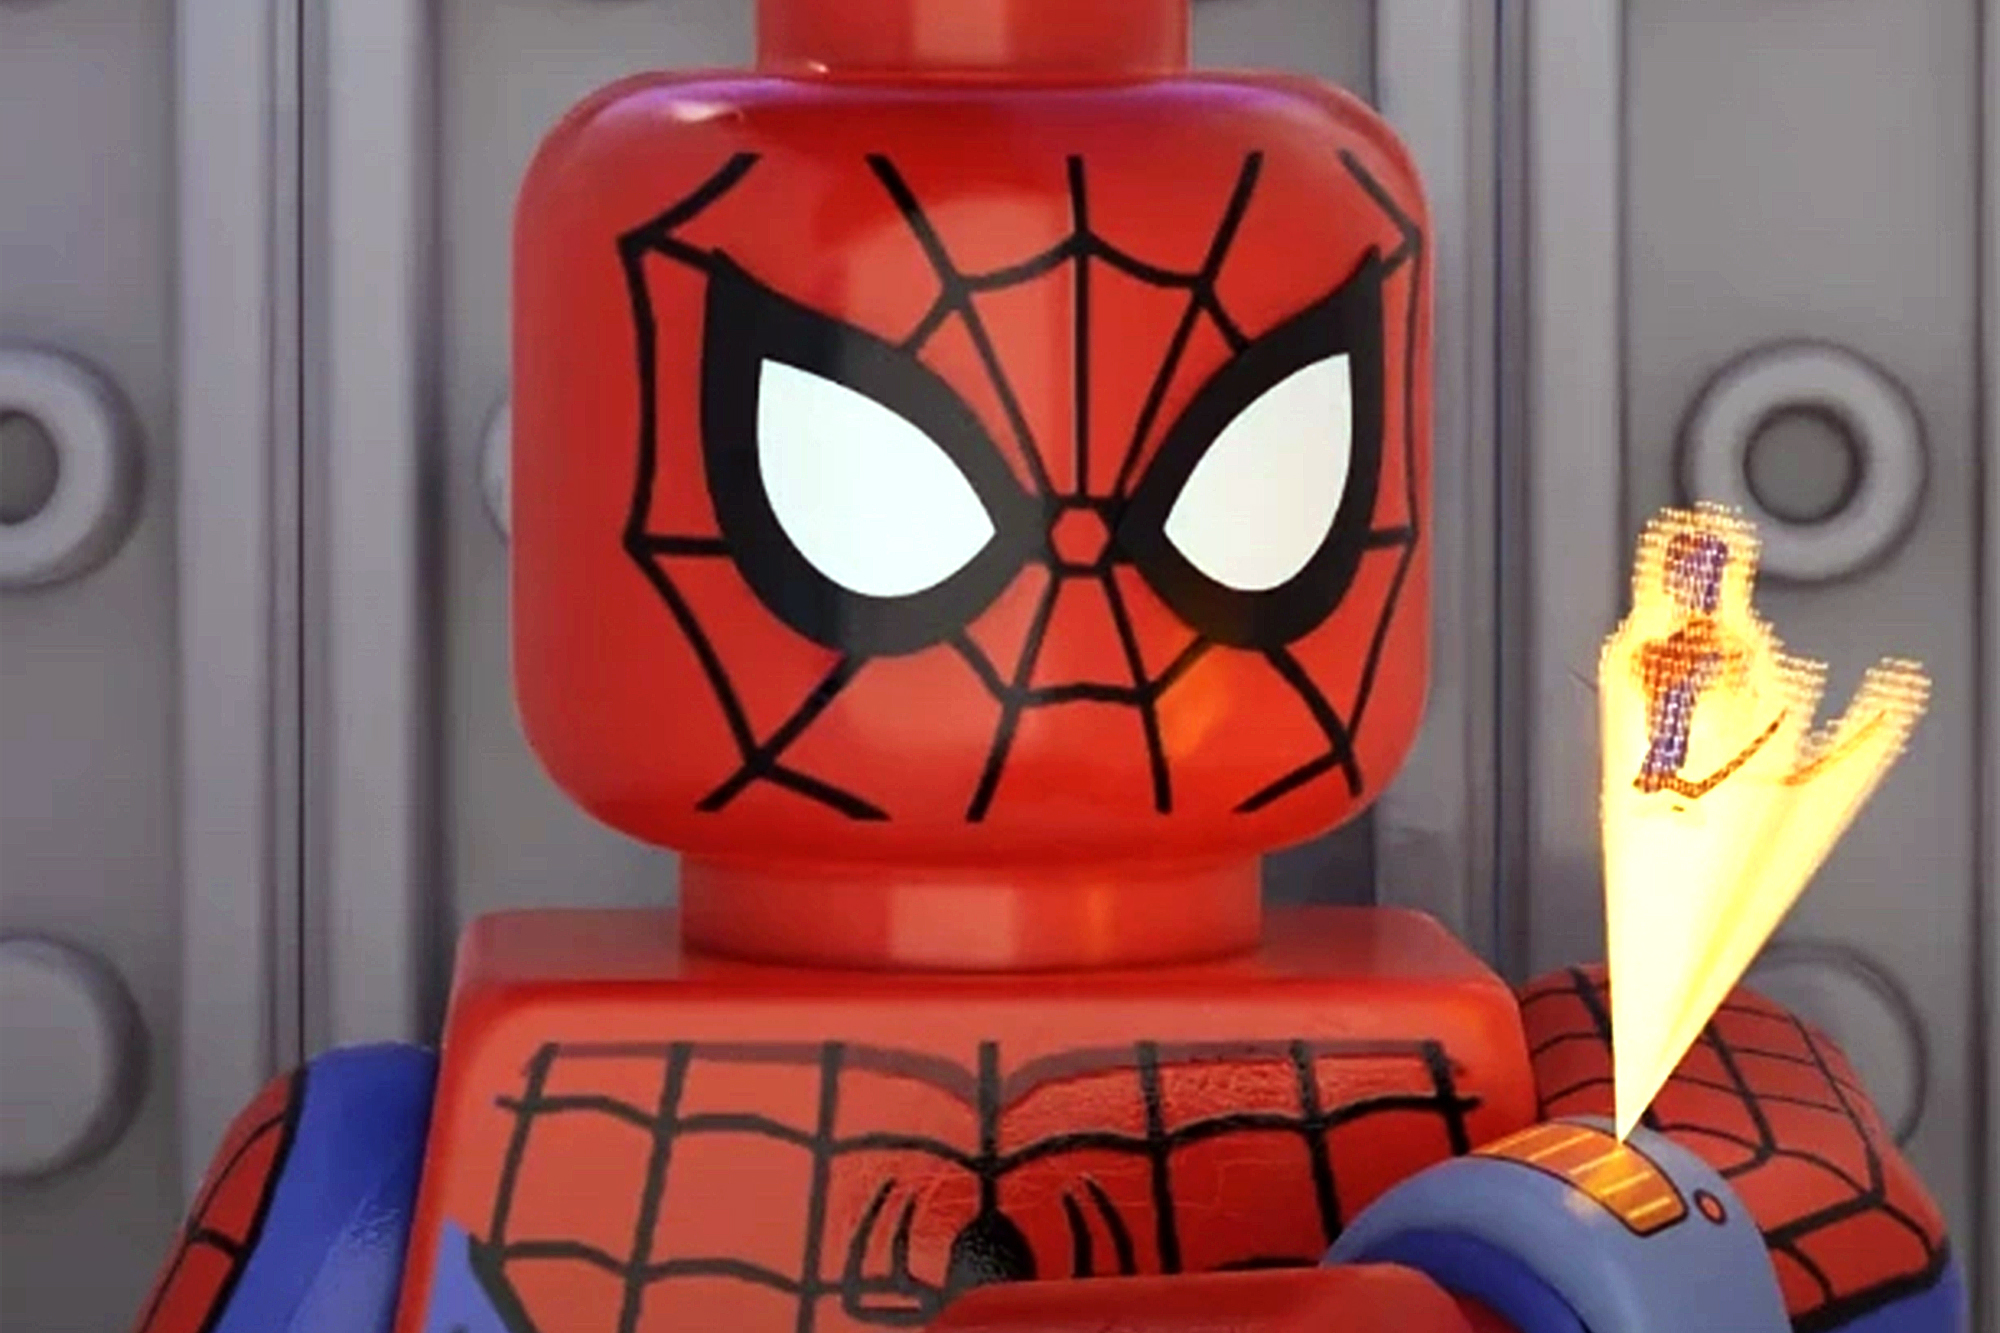 The Spider-Man: Across the Spider-Verse Lego scene was animated by a 14-year-old prodigy